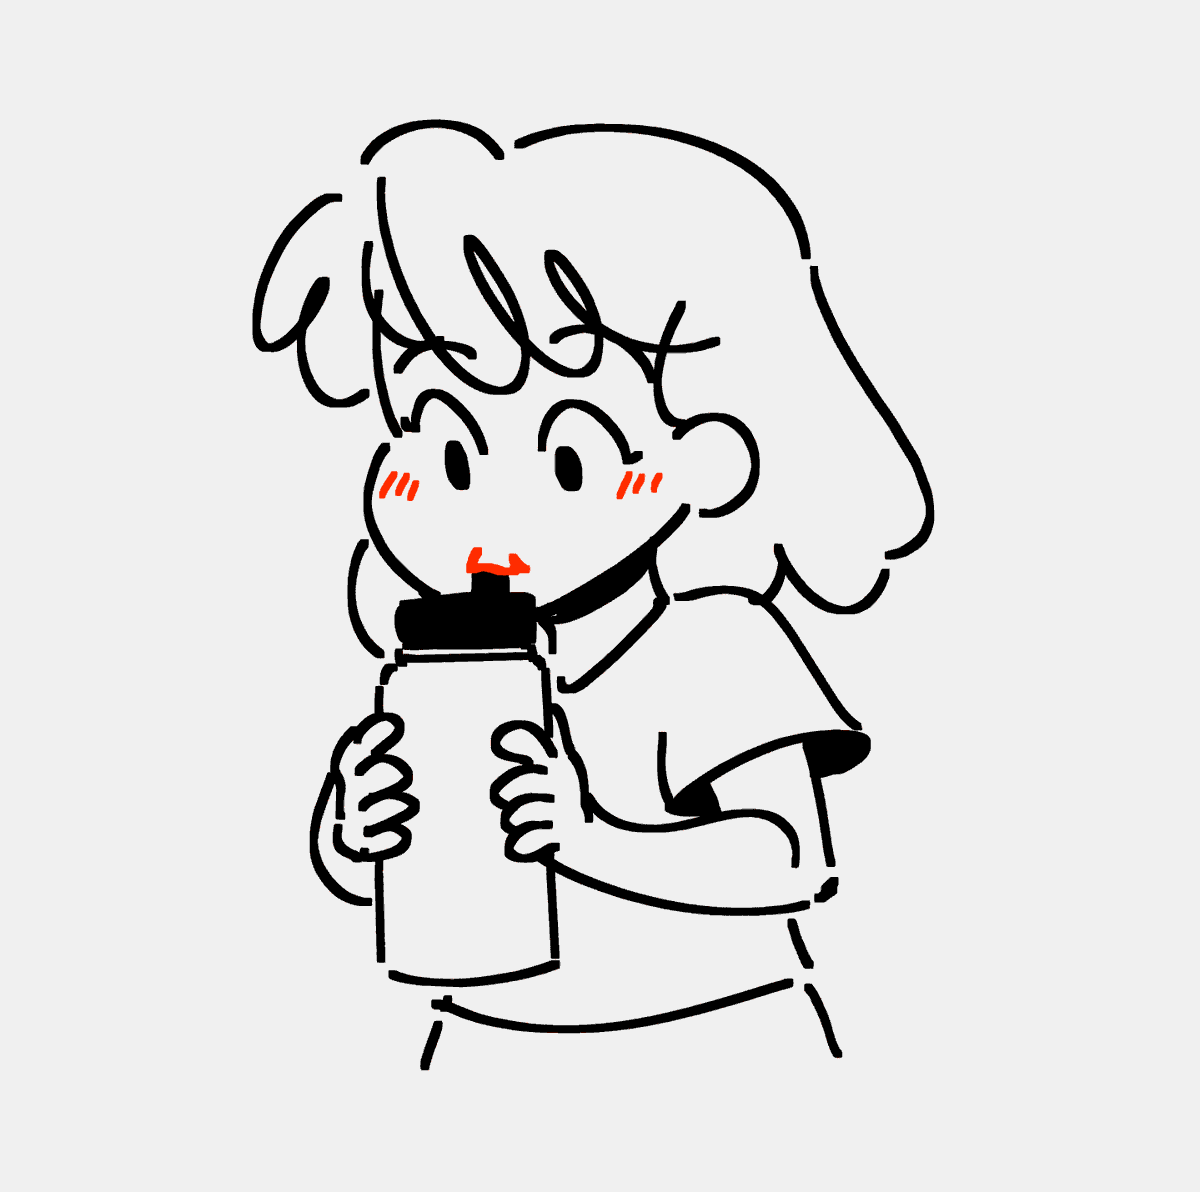 「70% of my day is just drinking water lol」|Marie Lum 林のイラスト